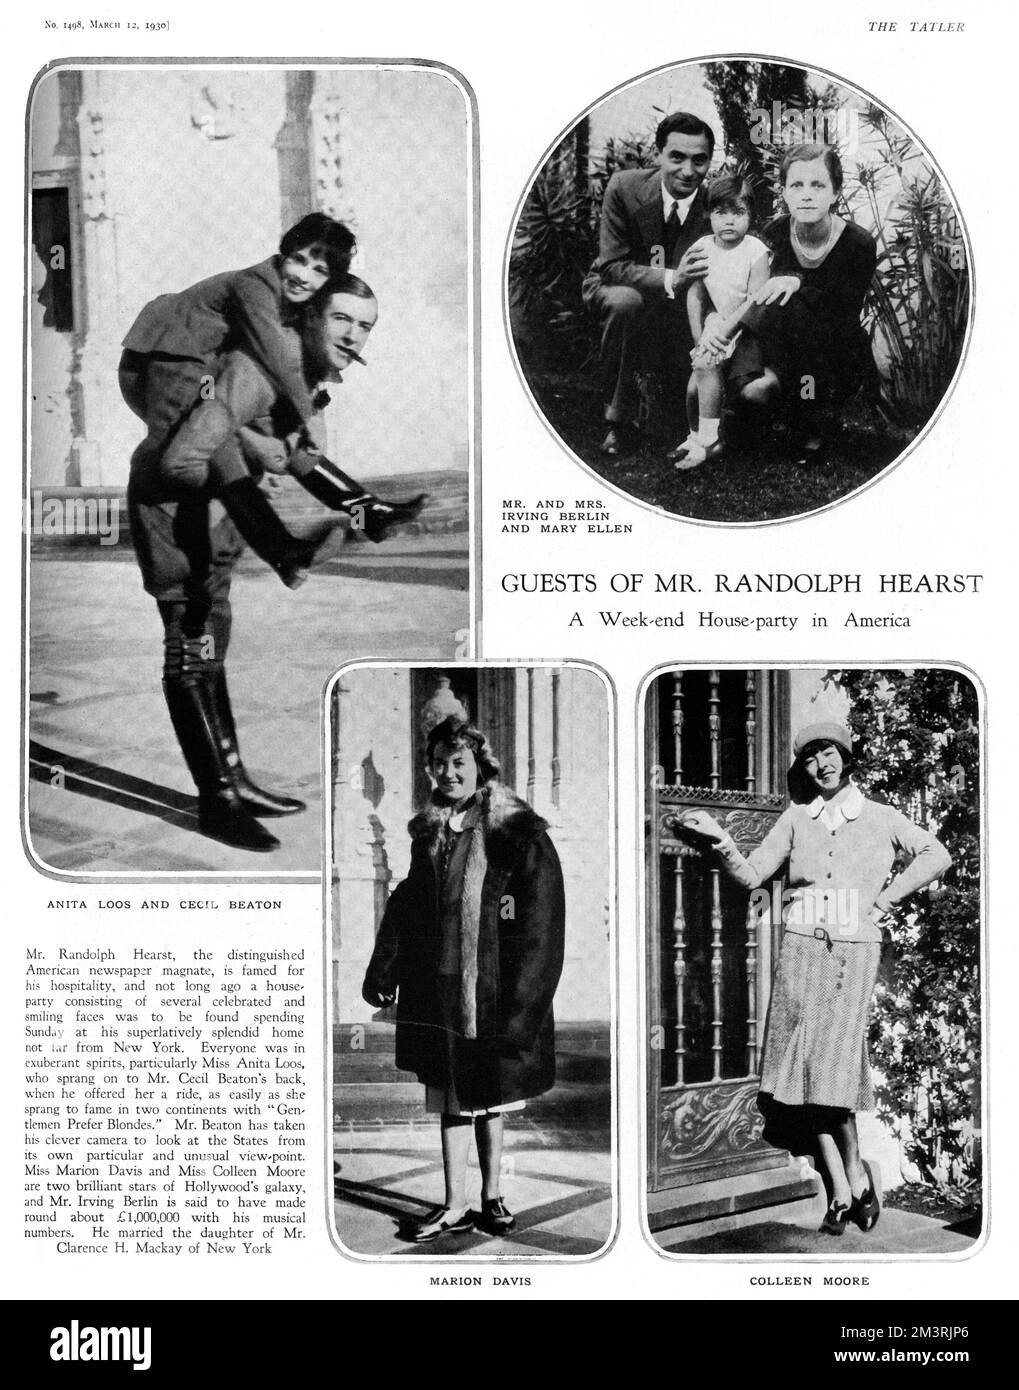 Page from The Tatler reporting on a weekend house party held at the home of American newspaper magnate, William Randolph Hearst.  Top left shows Cecil Beaton giving Anita Loos a piggy back.  Top right is Irving Berlin and his wife with their daughter, Mary Ellen.  Bottom right is Colleen Moore (actress) and finally, a photograph of Marion Davies, the actress who was Randolph Hearst's lover.  1930 Stock Photo